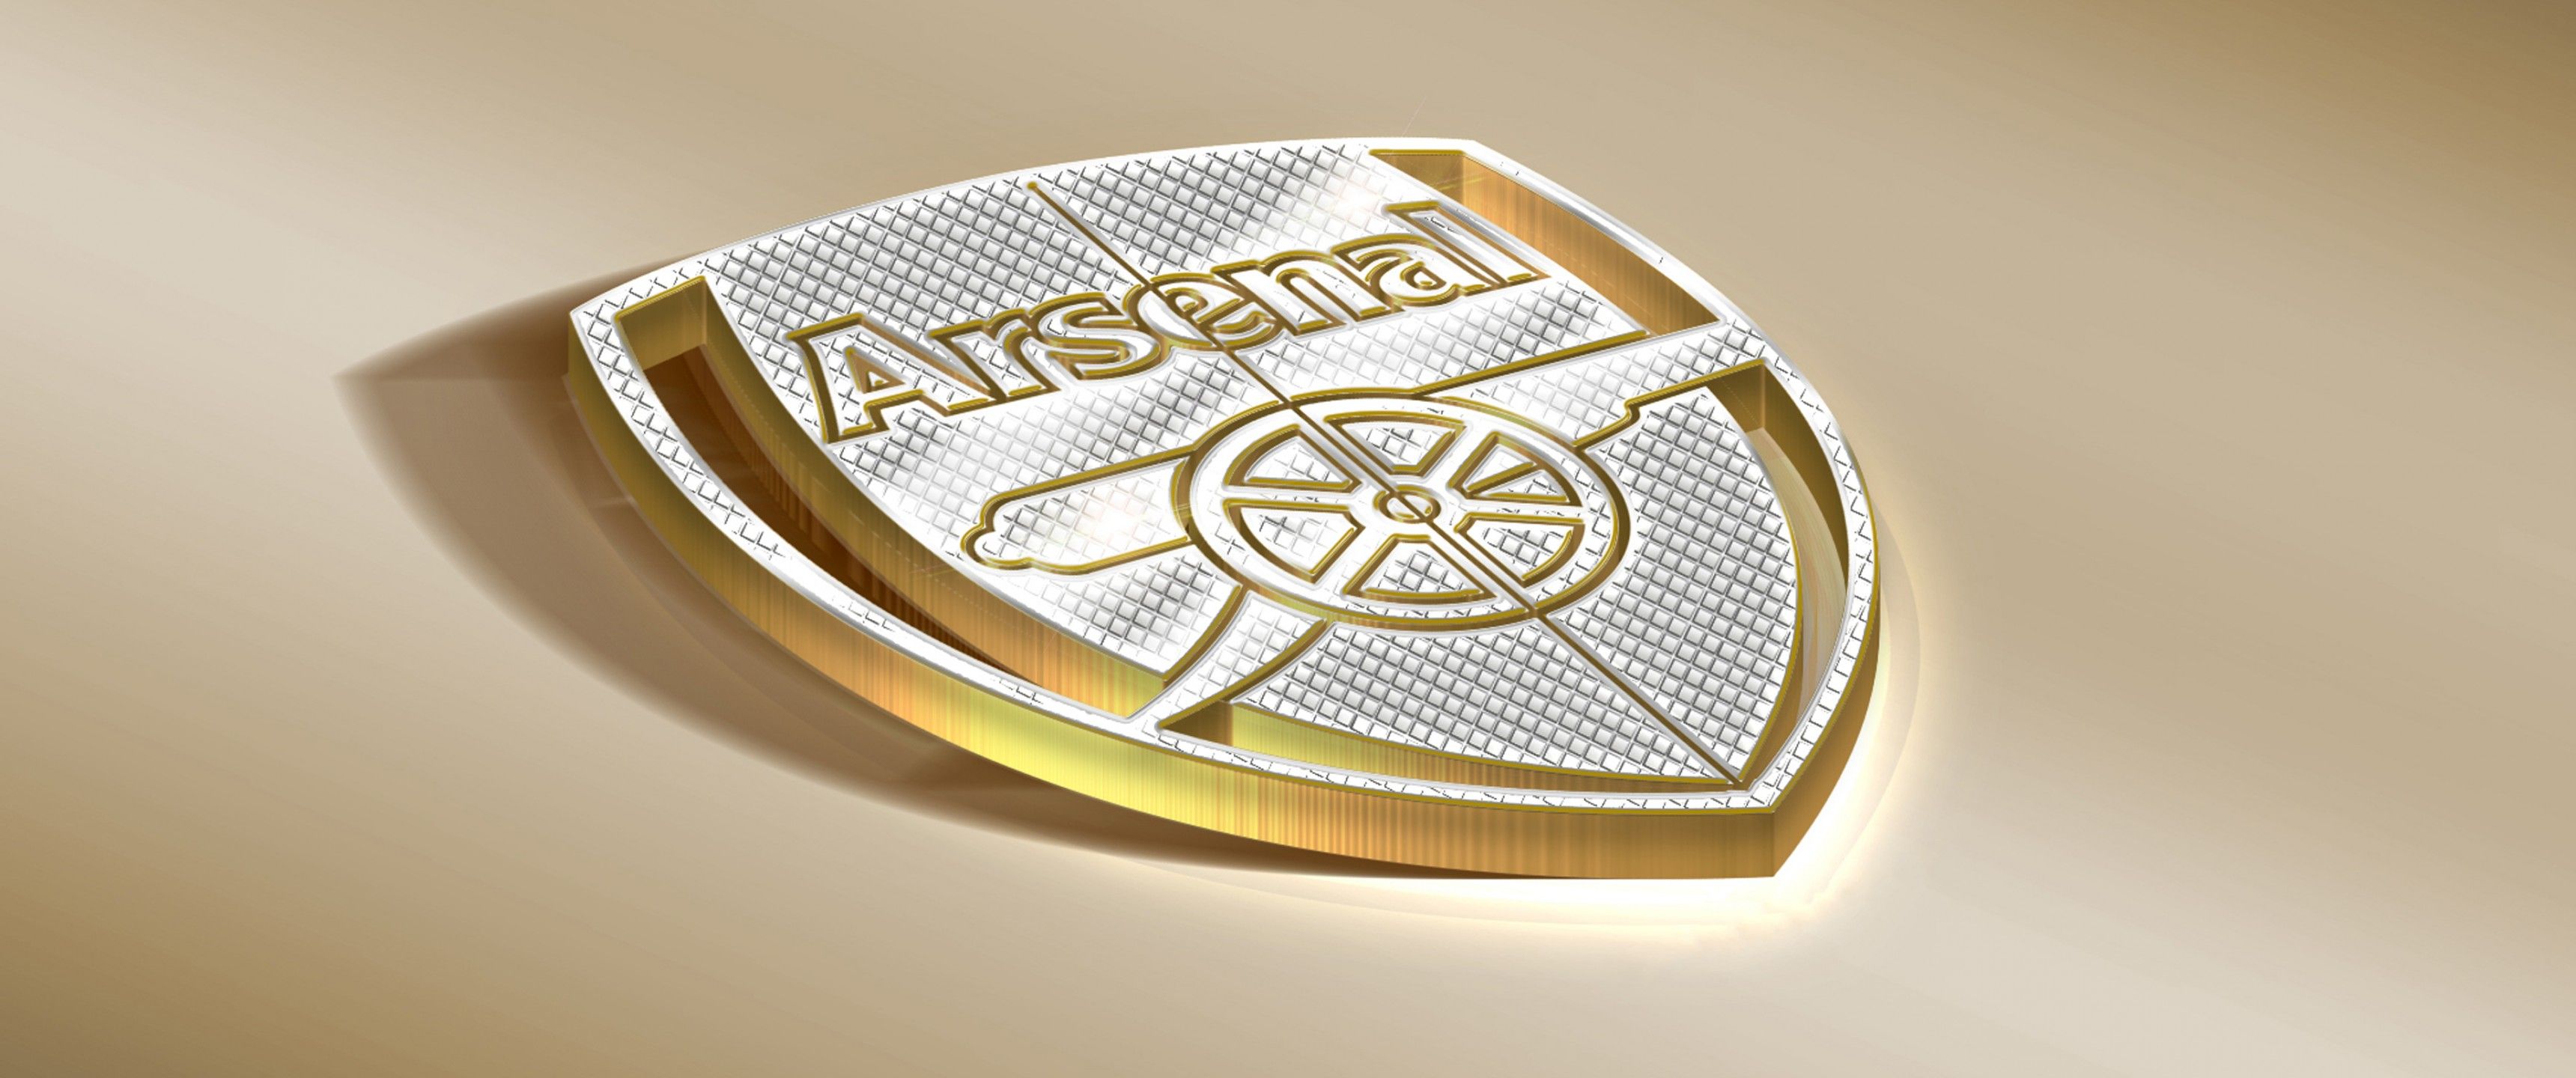 Arsenal FC 4K Wallpaper 3440x1440 Hot Desktop and background for your PC and mobile